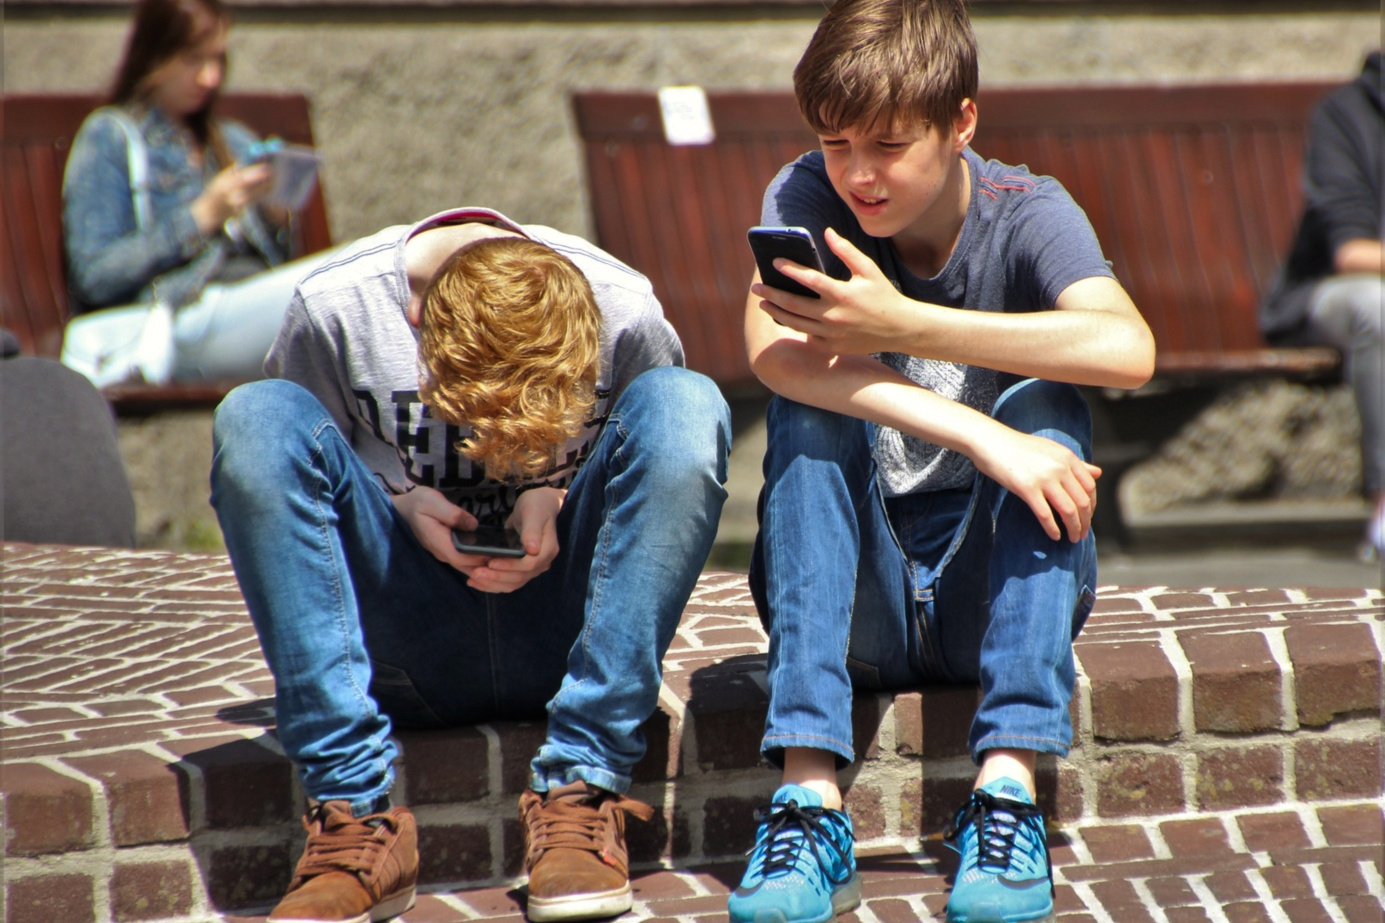 A US Bill Would Ban Kids Under 13 From Joining Social Media